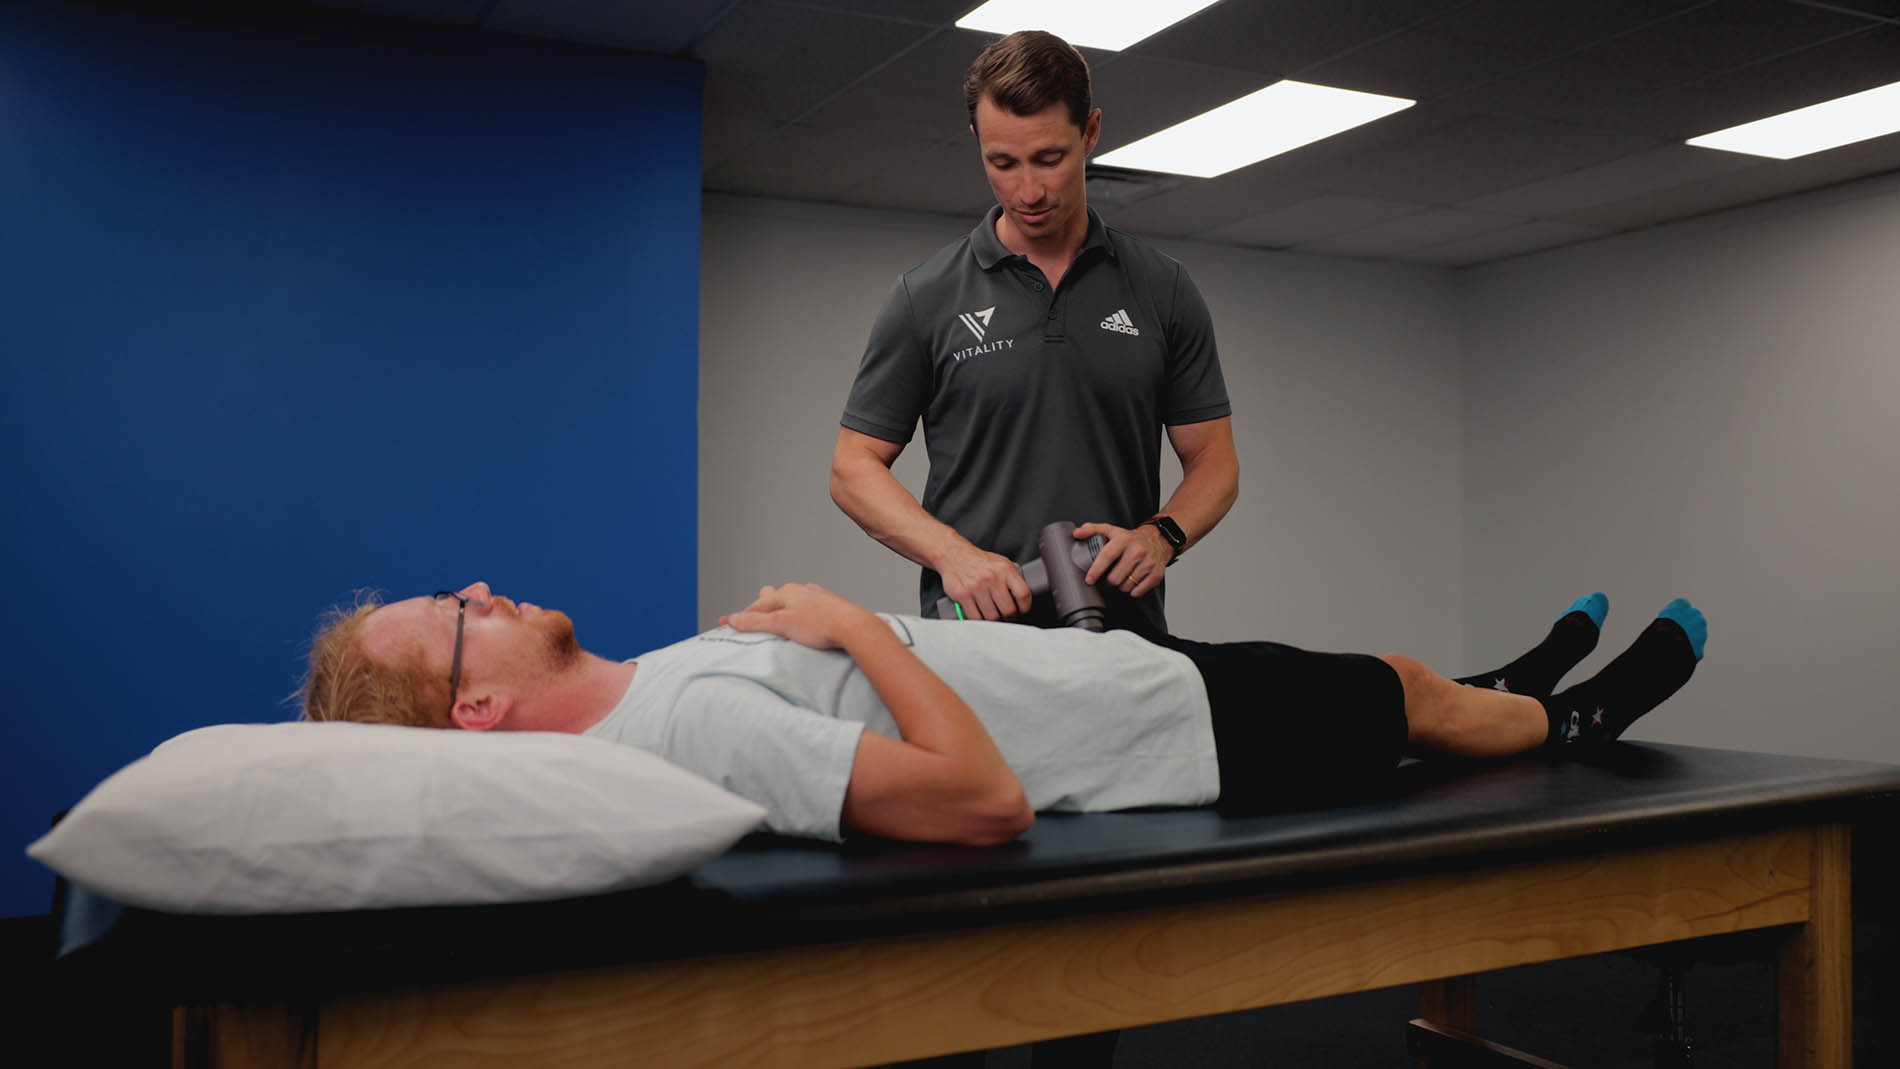 A physical therapist specializing in pelvic health in a clinic assesses the knee of a male patient lying on a treatment table, both wearing sporty attire.